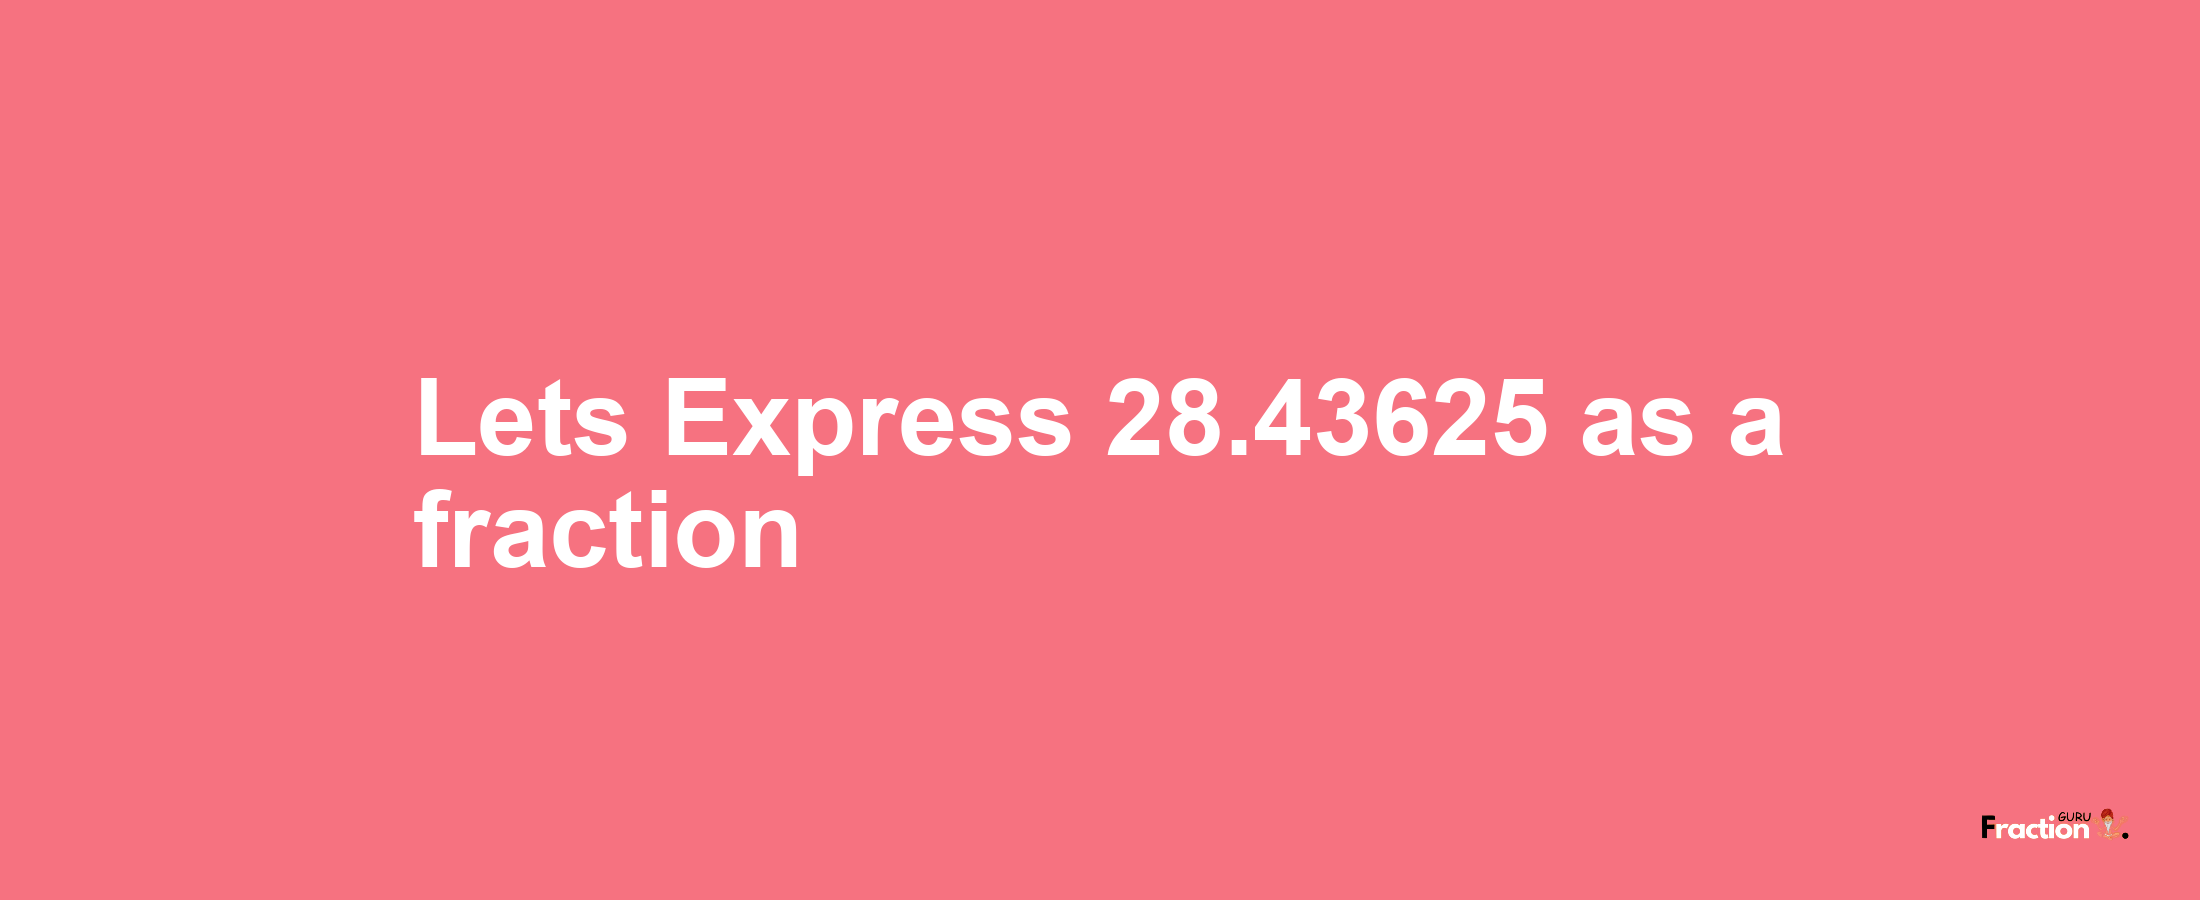 Lets Express 28.43625 as afraction